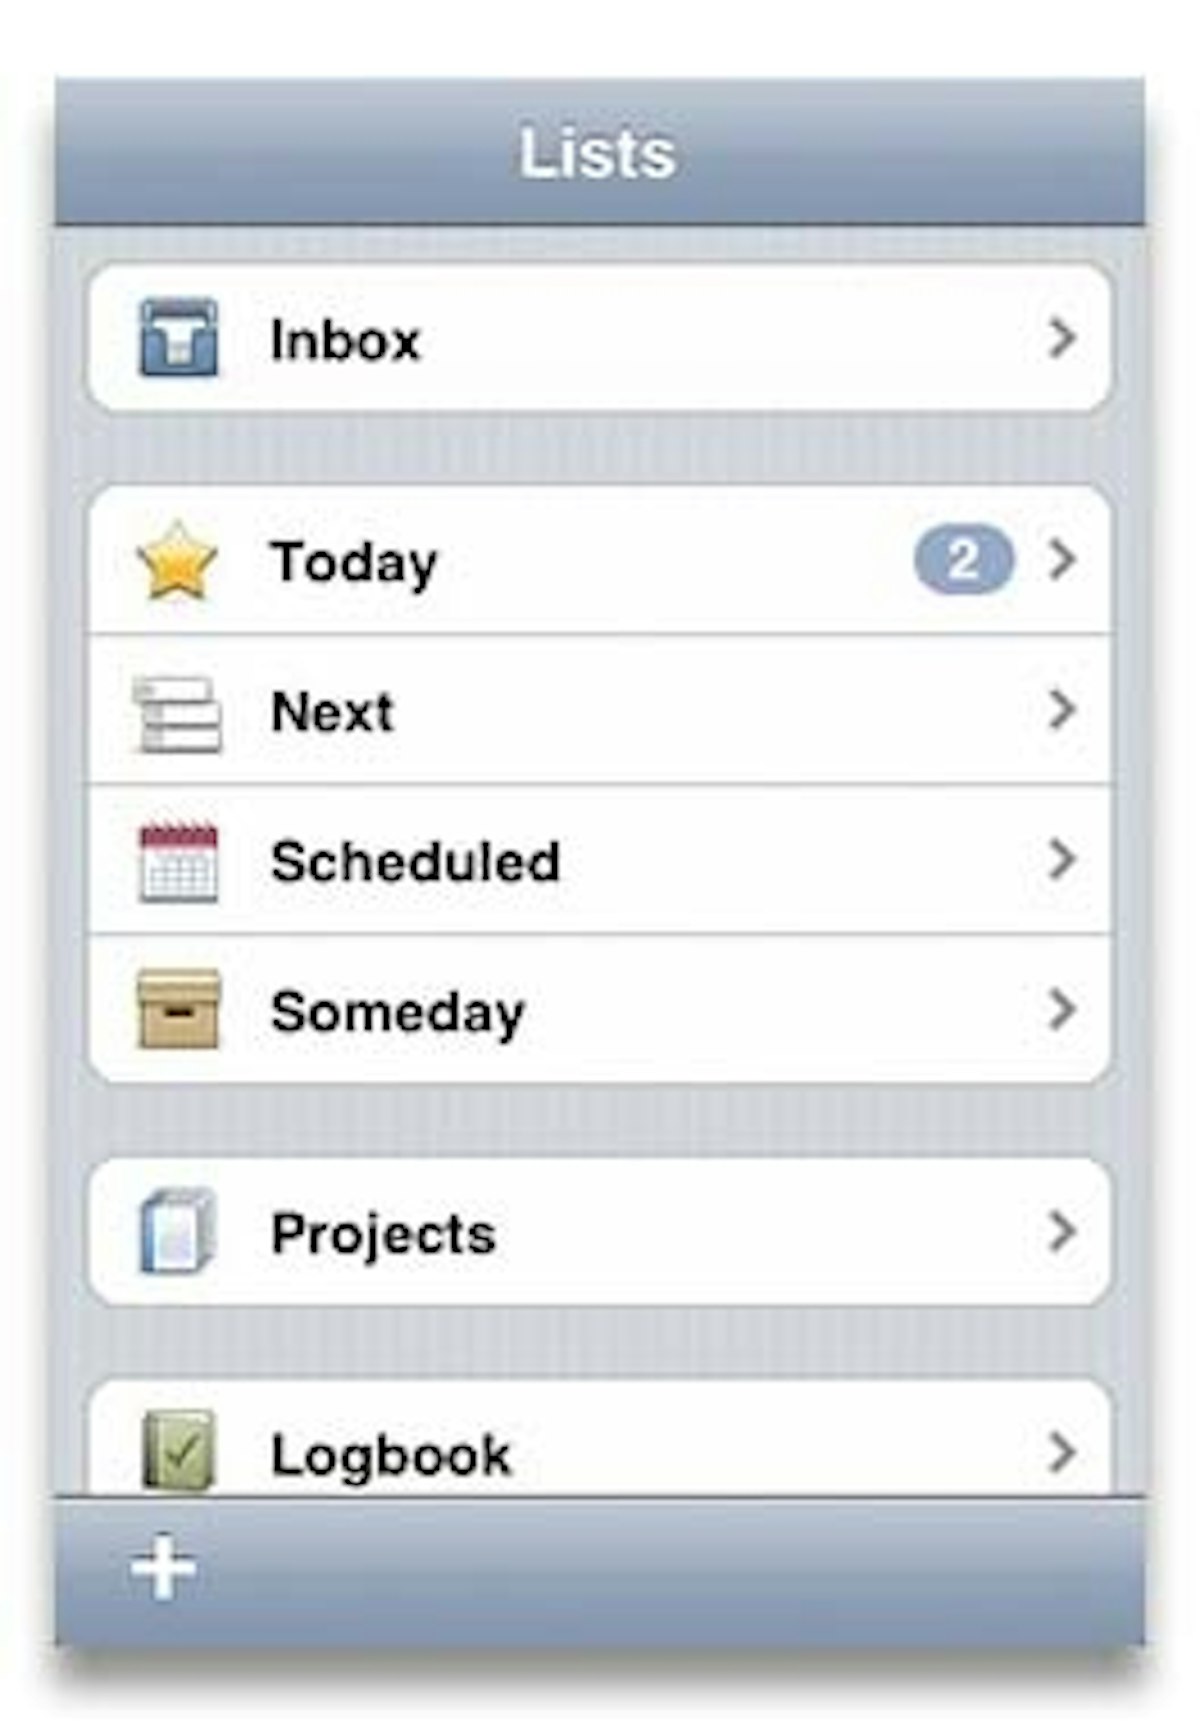  Getting Things Done: Great To-Do List App